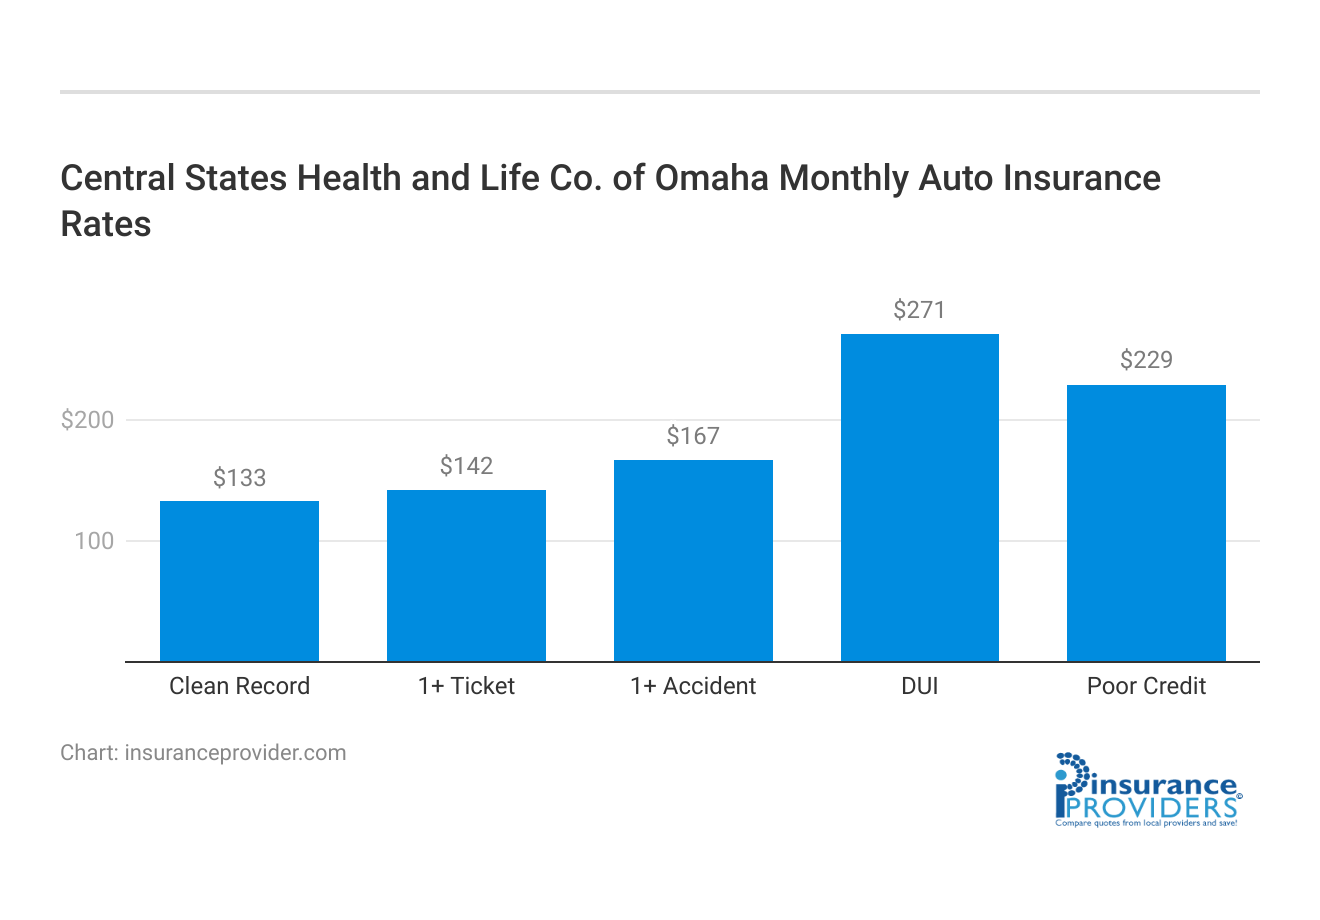 <h3>Central States Health and Life Co. of Omaha Monthly Auto Insurance Rates</h3>